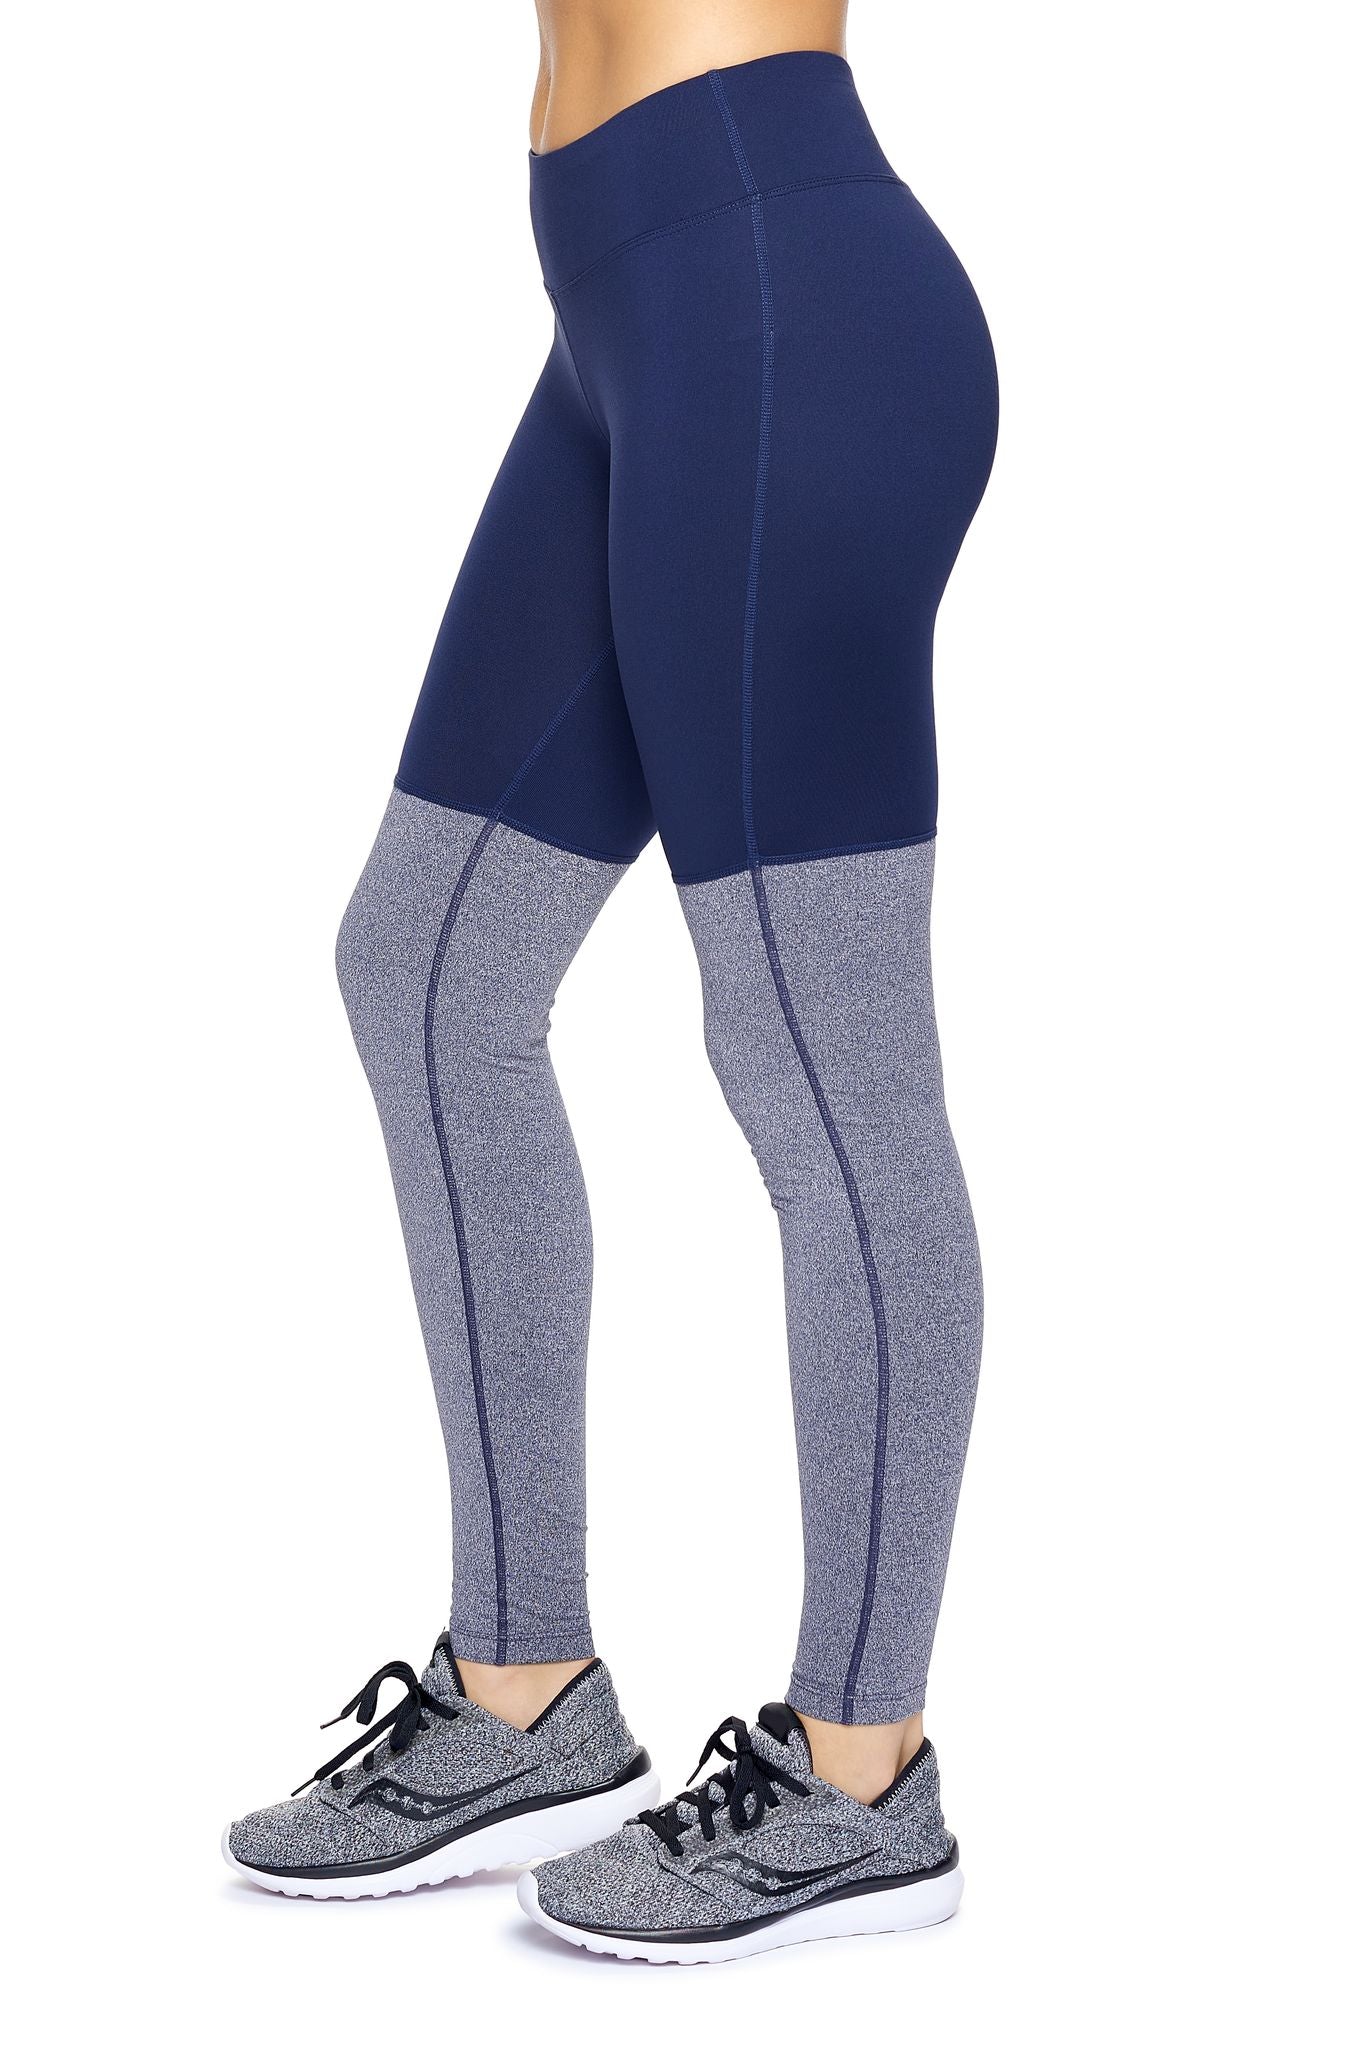 Expert Brand Wholesale Mid-Rise Heather Colorblock Leggings in Heather Navy#heather-navy